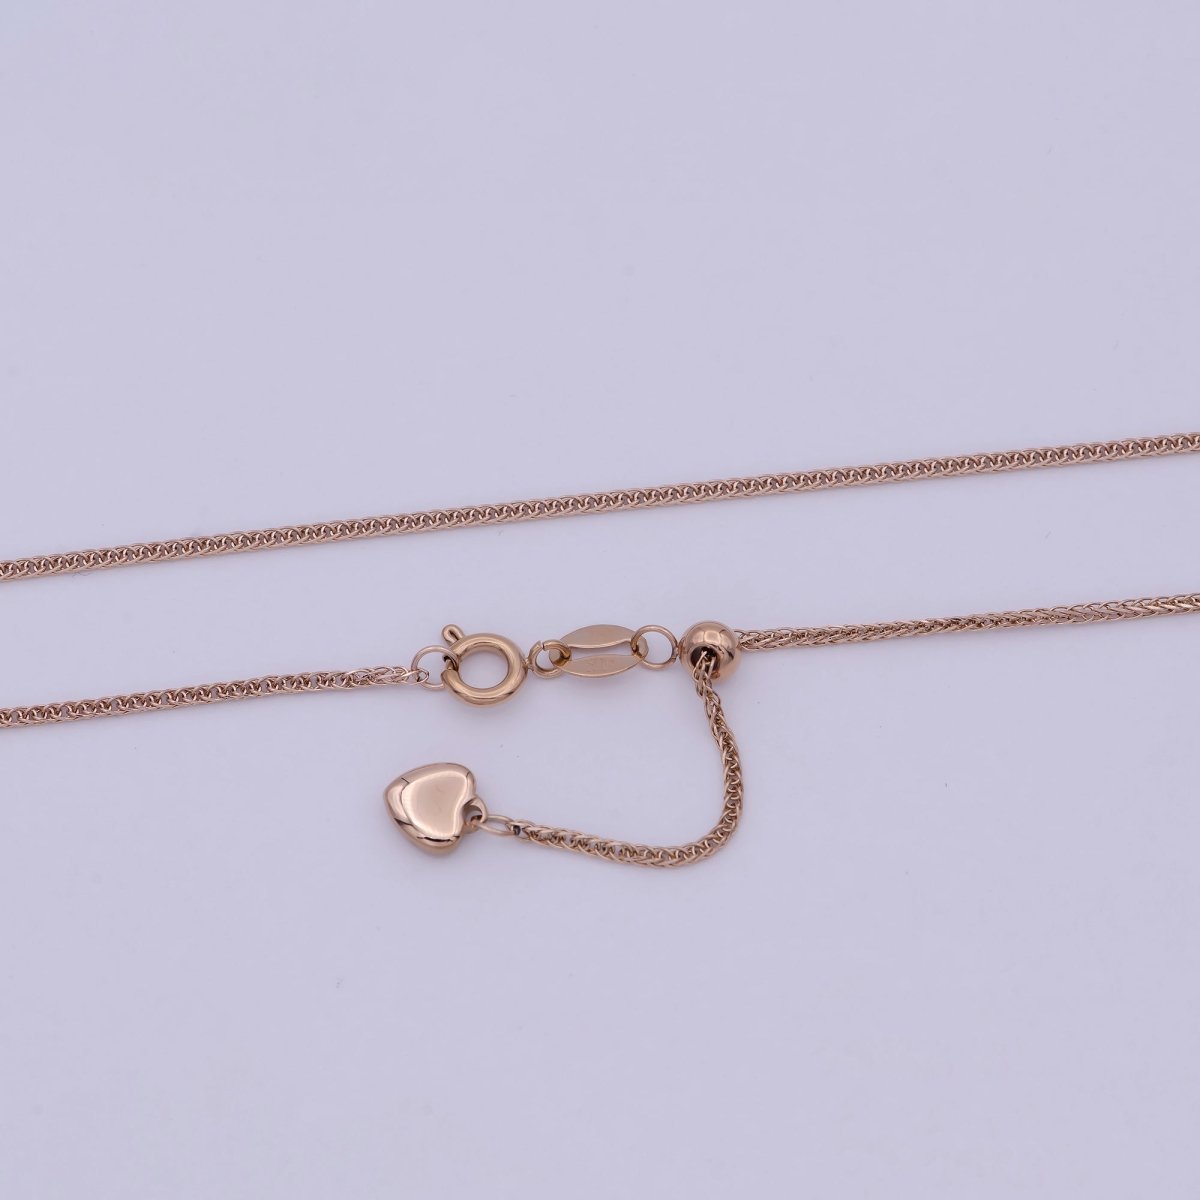 Rose Gold Fox Tail Chain Necklace - 18K Gold Plated Foxtail Chain - Dainty 1.4mm Layering 20 Inch Ready To Wear Chain with Spring Ring | WA-515 Clearance Pricing - DLUXCA